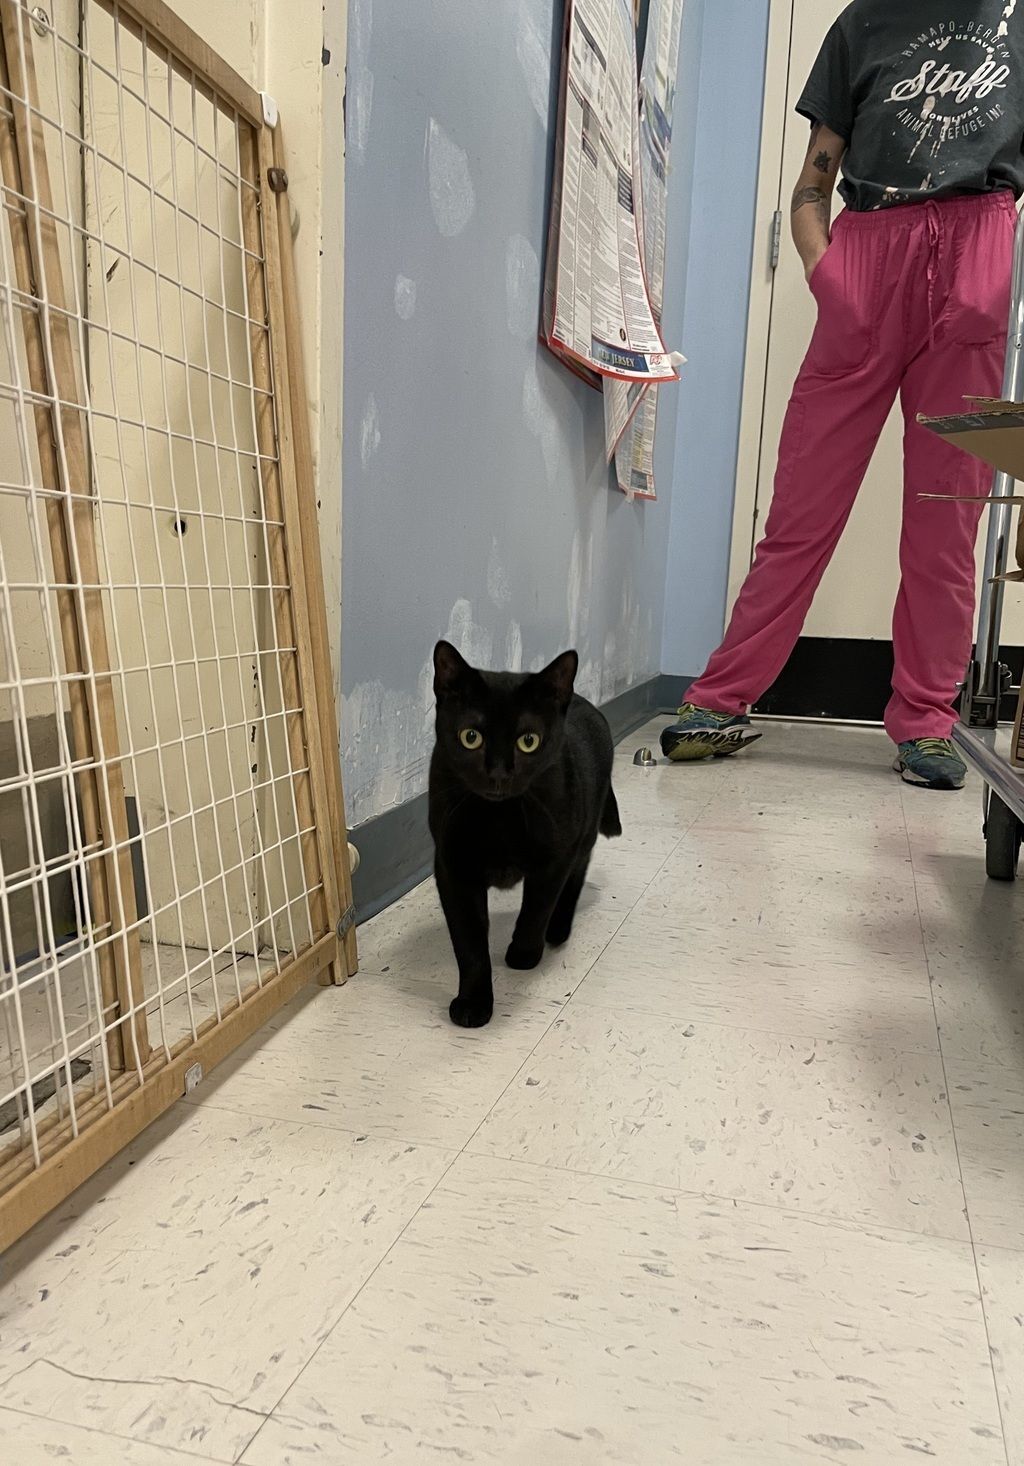 Black cat, whom no one wanted to adopt, goes viral (Fox 5 New York)